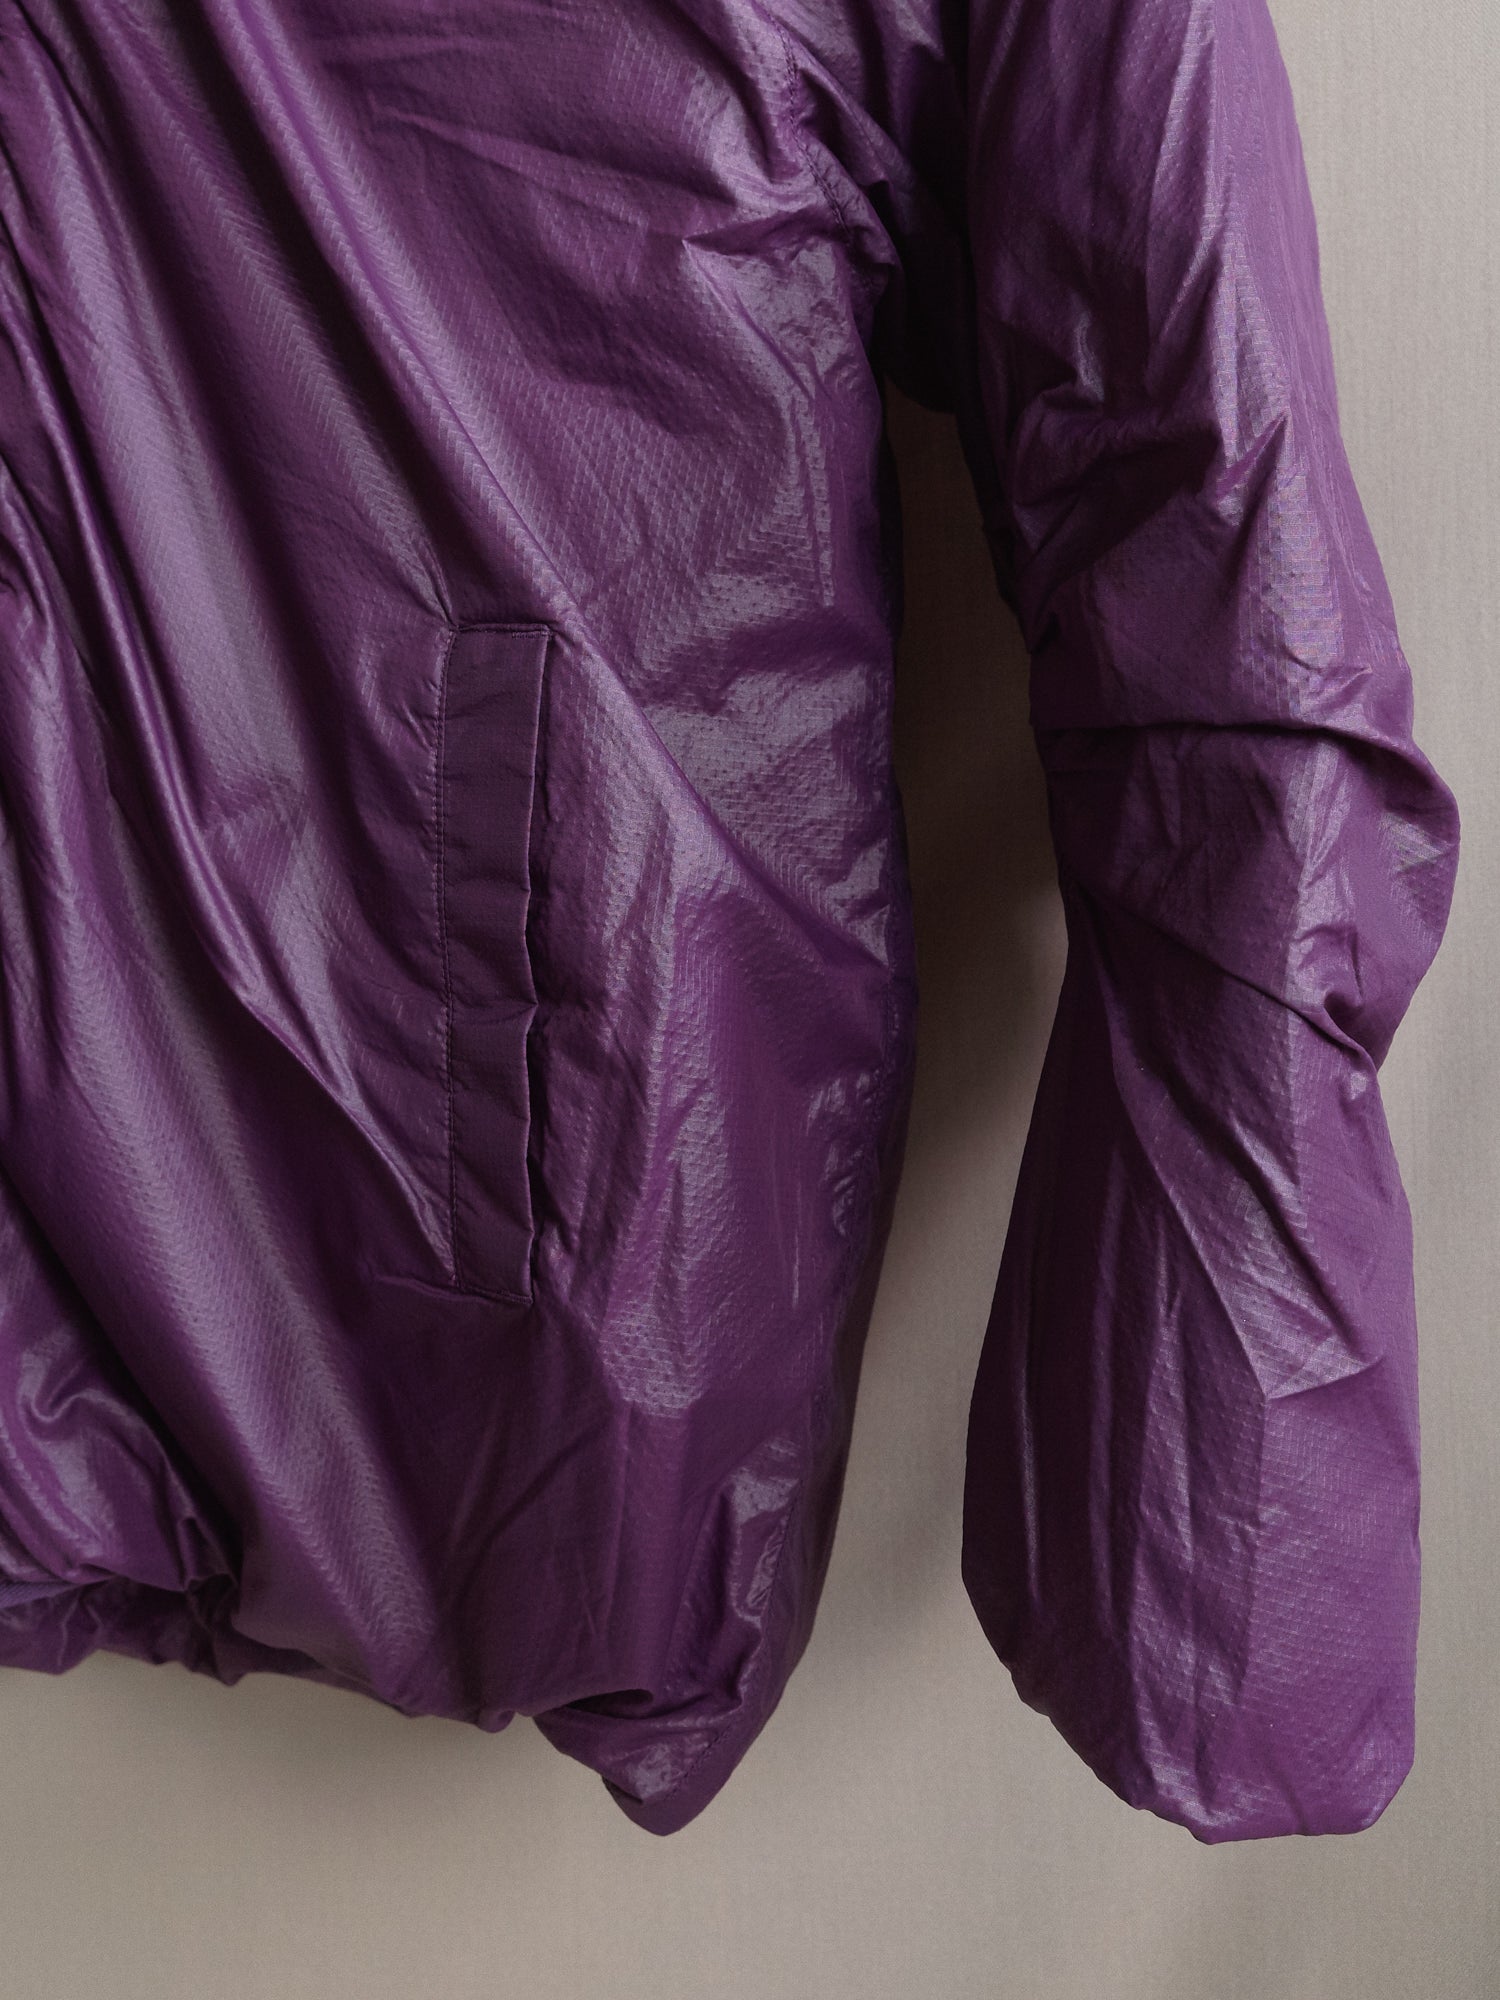 Final Home 1990s purple ripstop nylon hooded down jacket - mens S